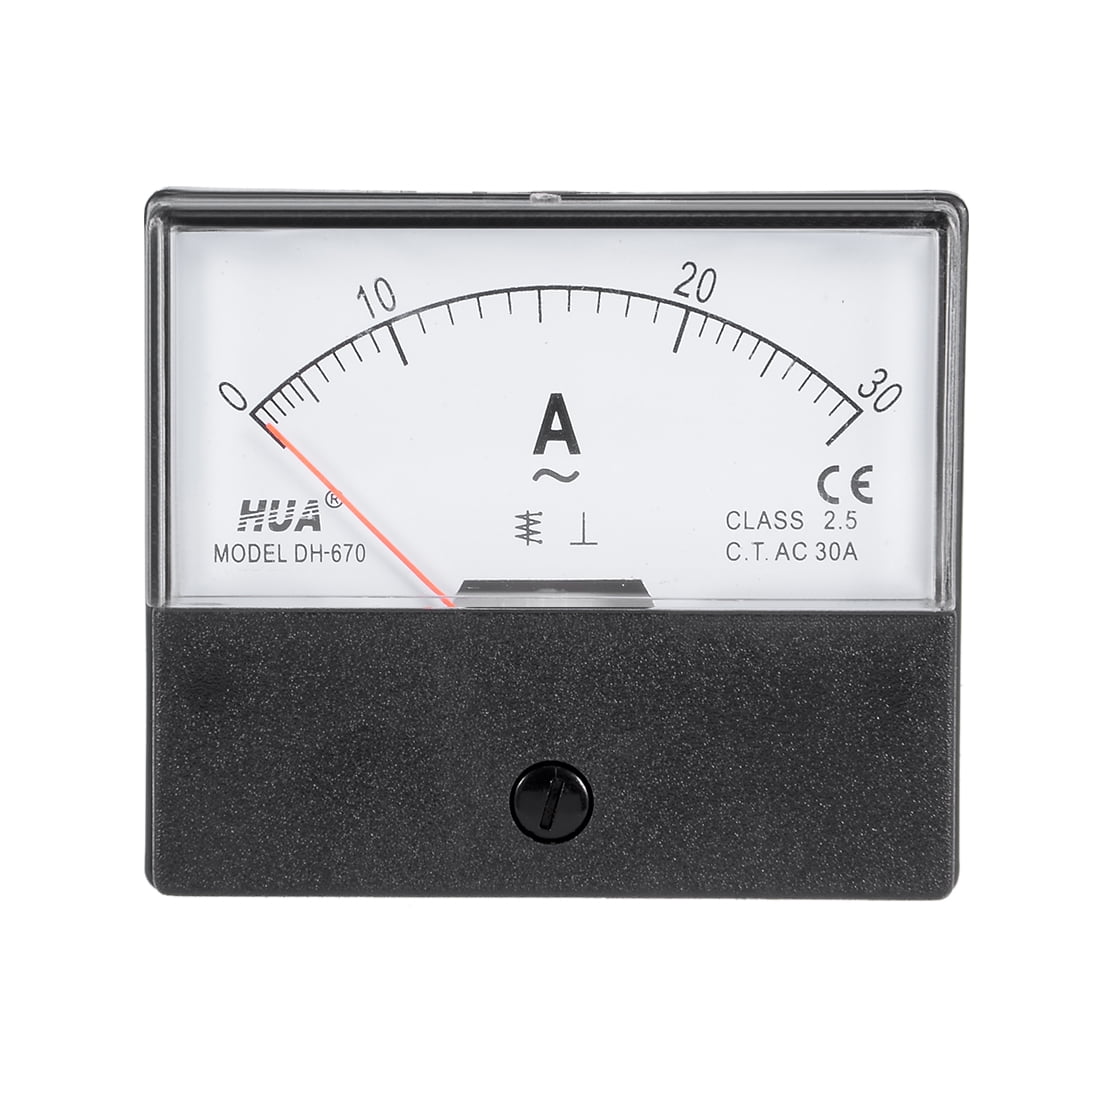 IndustrialField AC Analog Meter Panel 300A AMP Current Ammeters 85L1 0-300A Gauge 